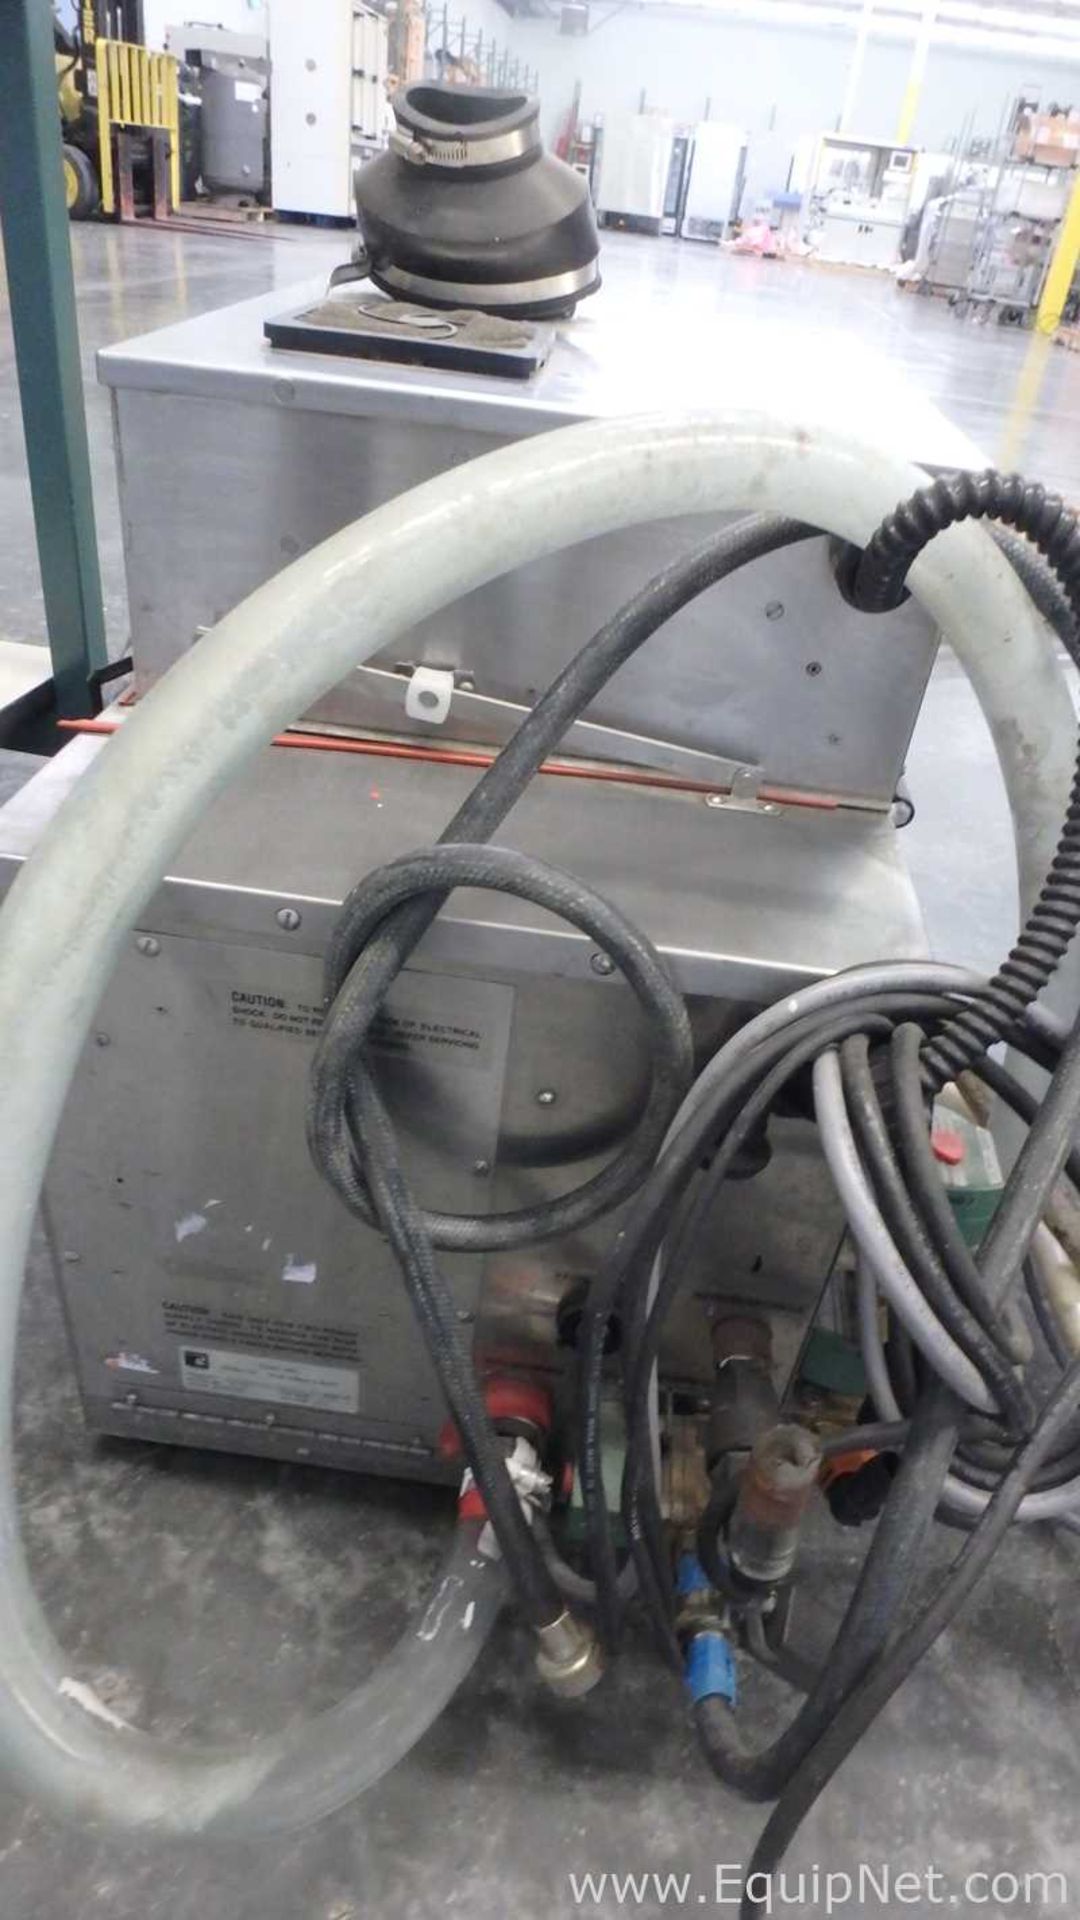 ESMA Inc. E700 Ultrasonic Cleaning System with E997 30Gal Heated Storage Tank - Image 18 of 38